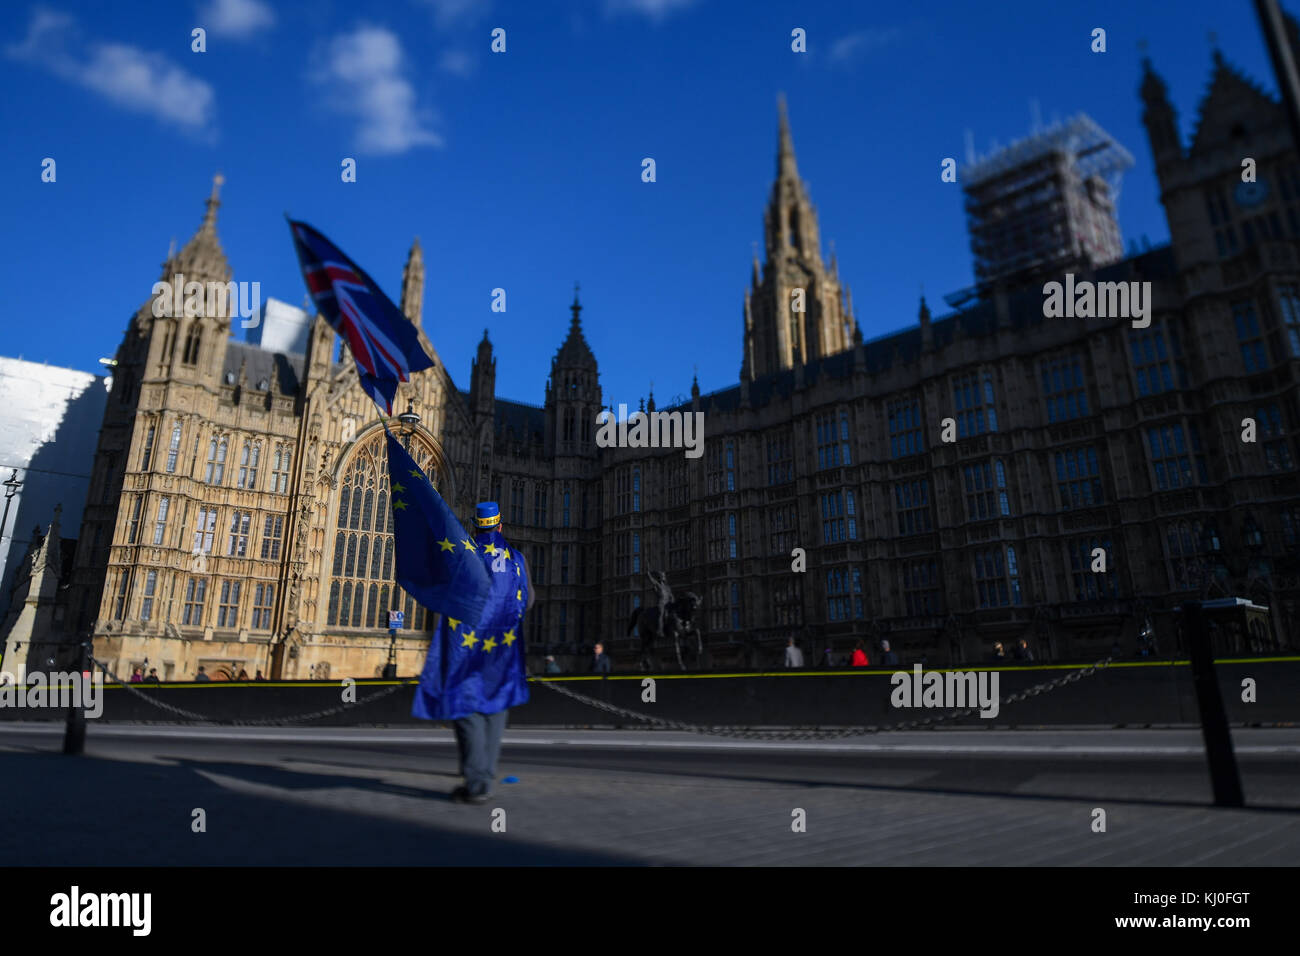 A lone Brexit protester continues his one man stand against the Brexit vote outcome outside the Houses of Parliament London. Stock Photo